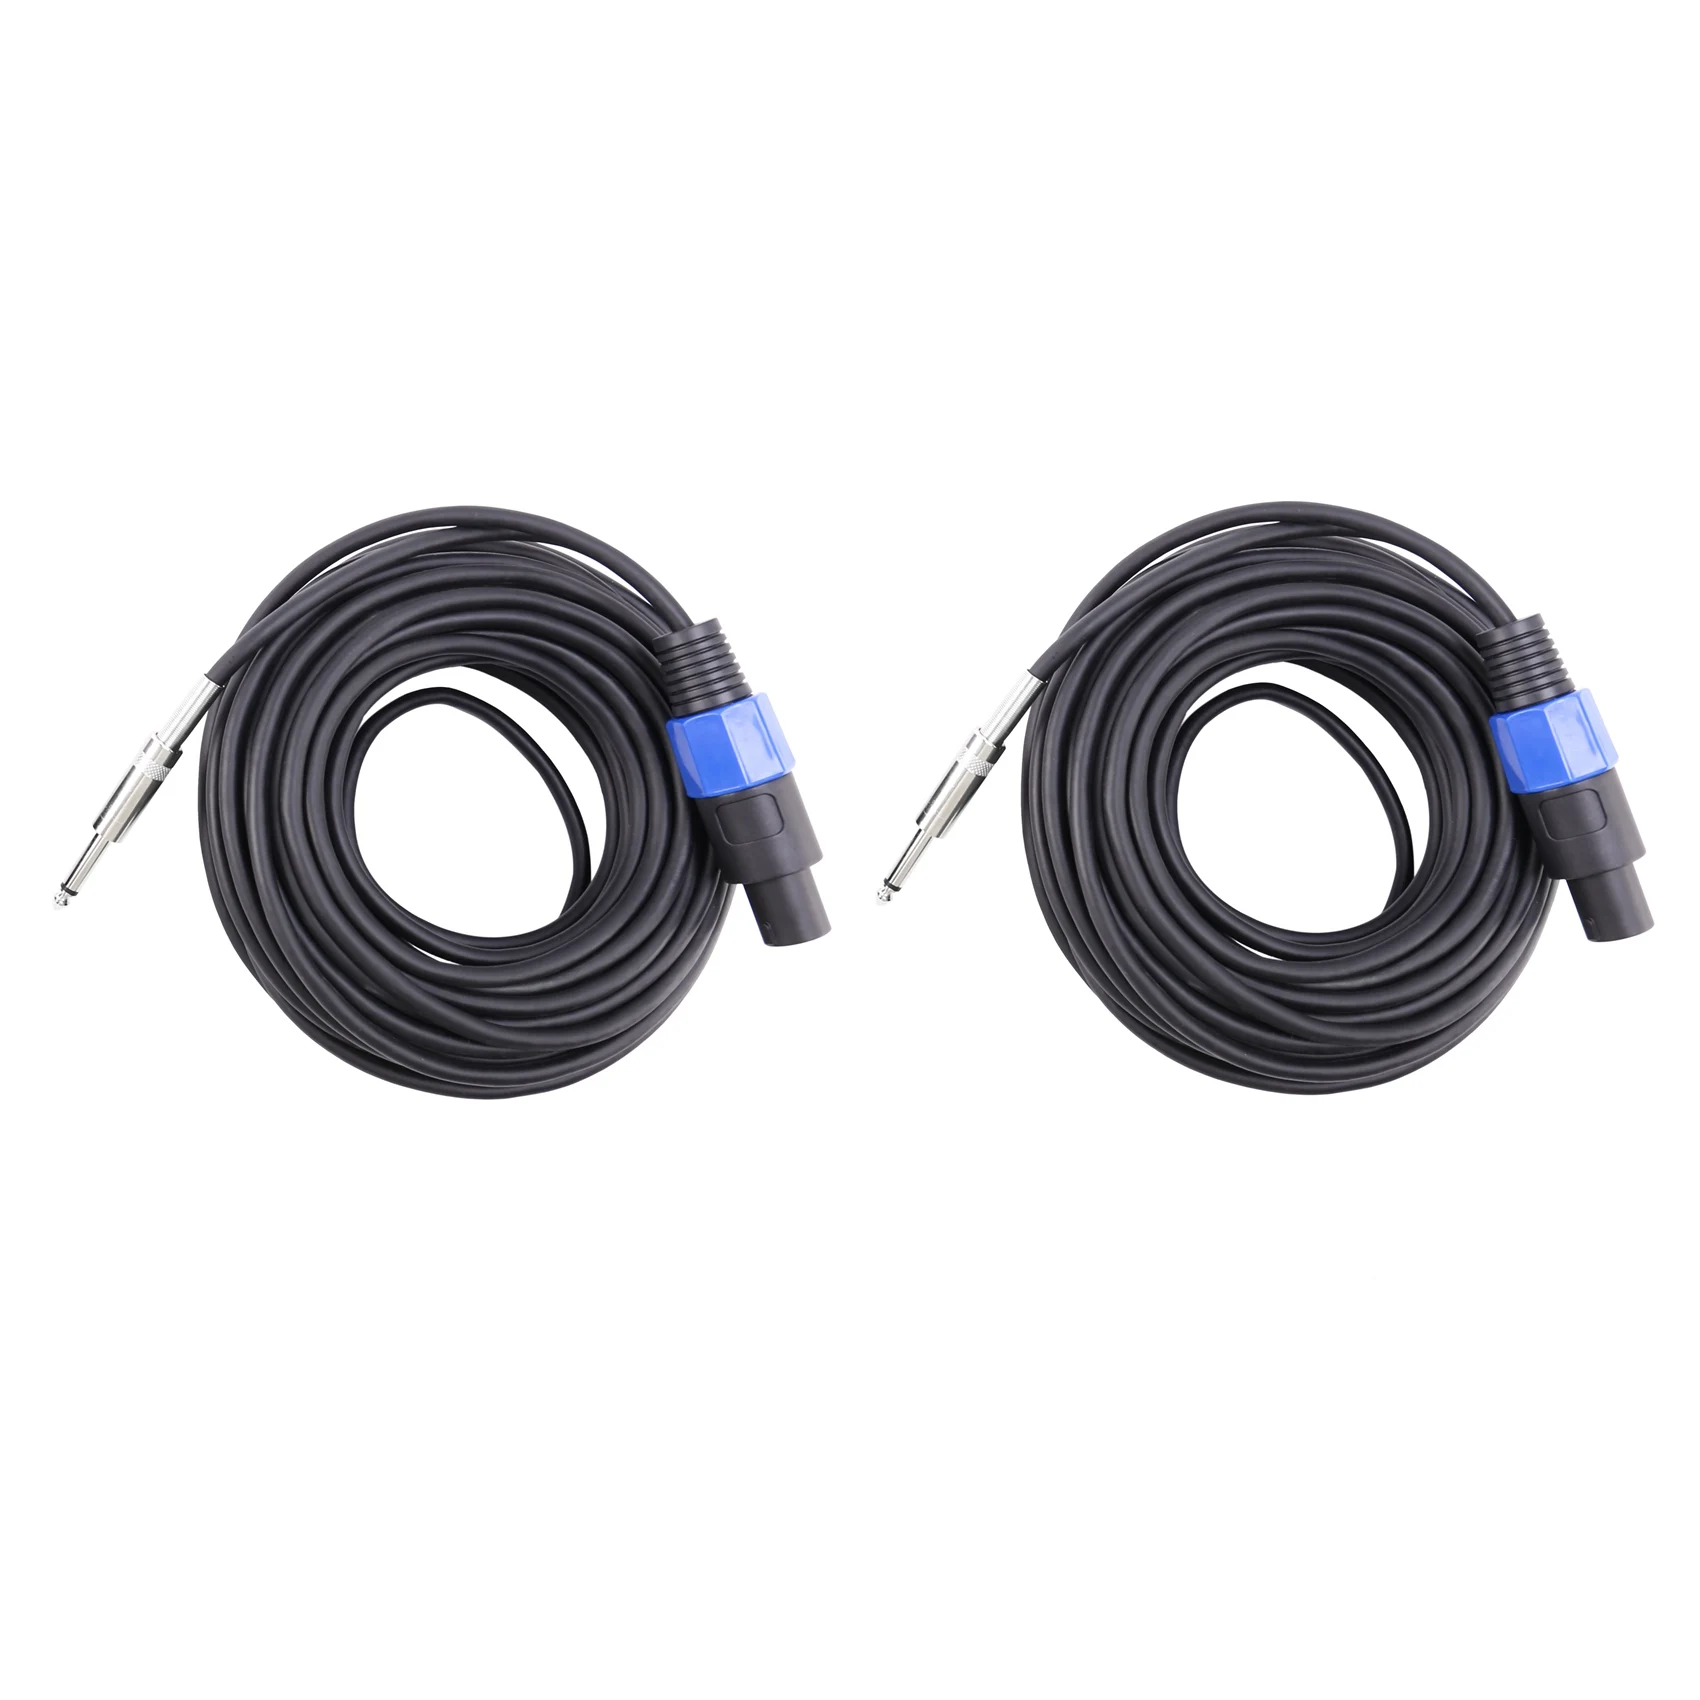 

2 Pack 50 Ft Speakon to 1/4 Inch Male Speaker Cables 12 Gauge AWG Wire Audio Amplifier Connection Cord 6.35mm DJ/PA Speaker